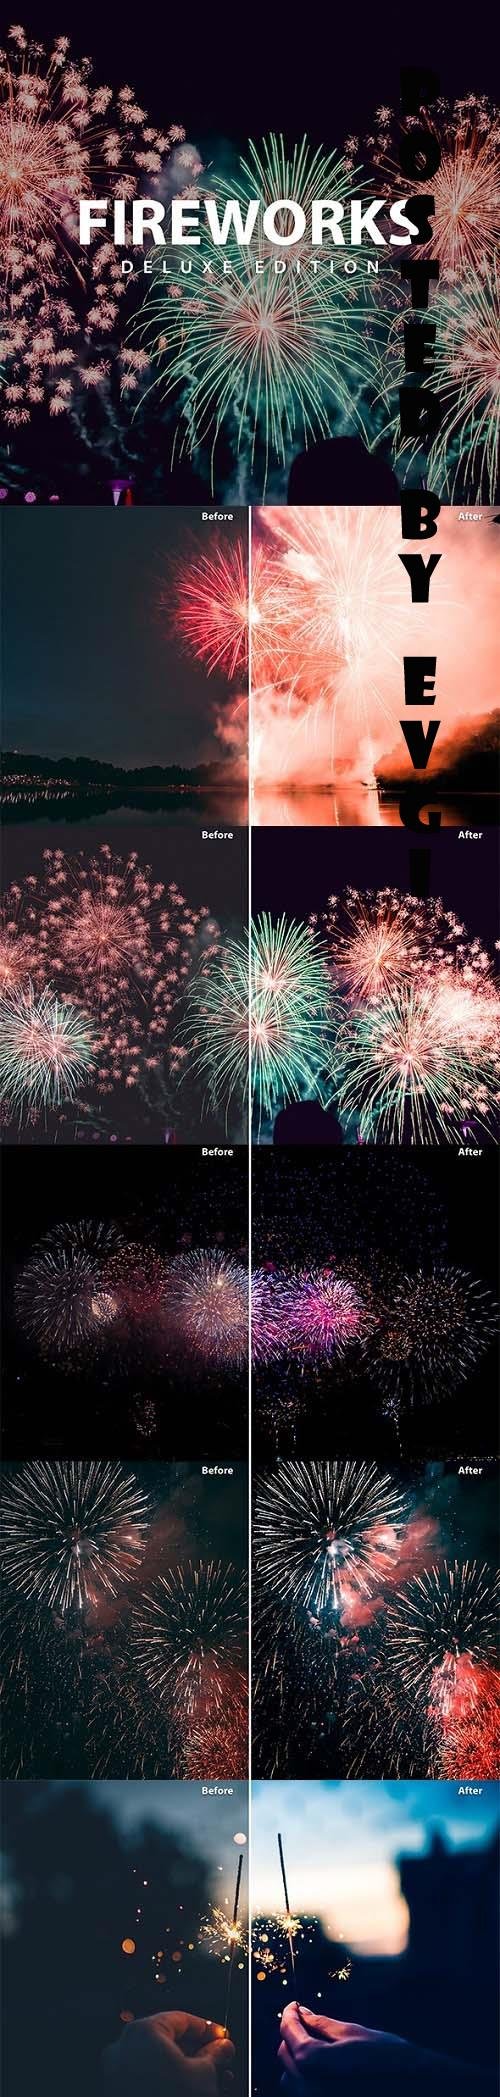 Fireworks Deluxe Edition | for Mobile and Desktop - 33180875